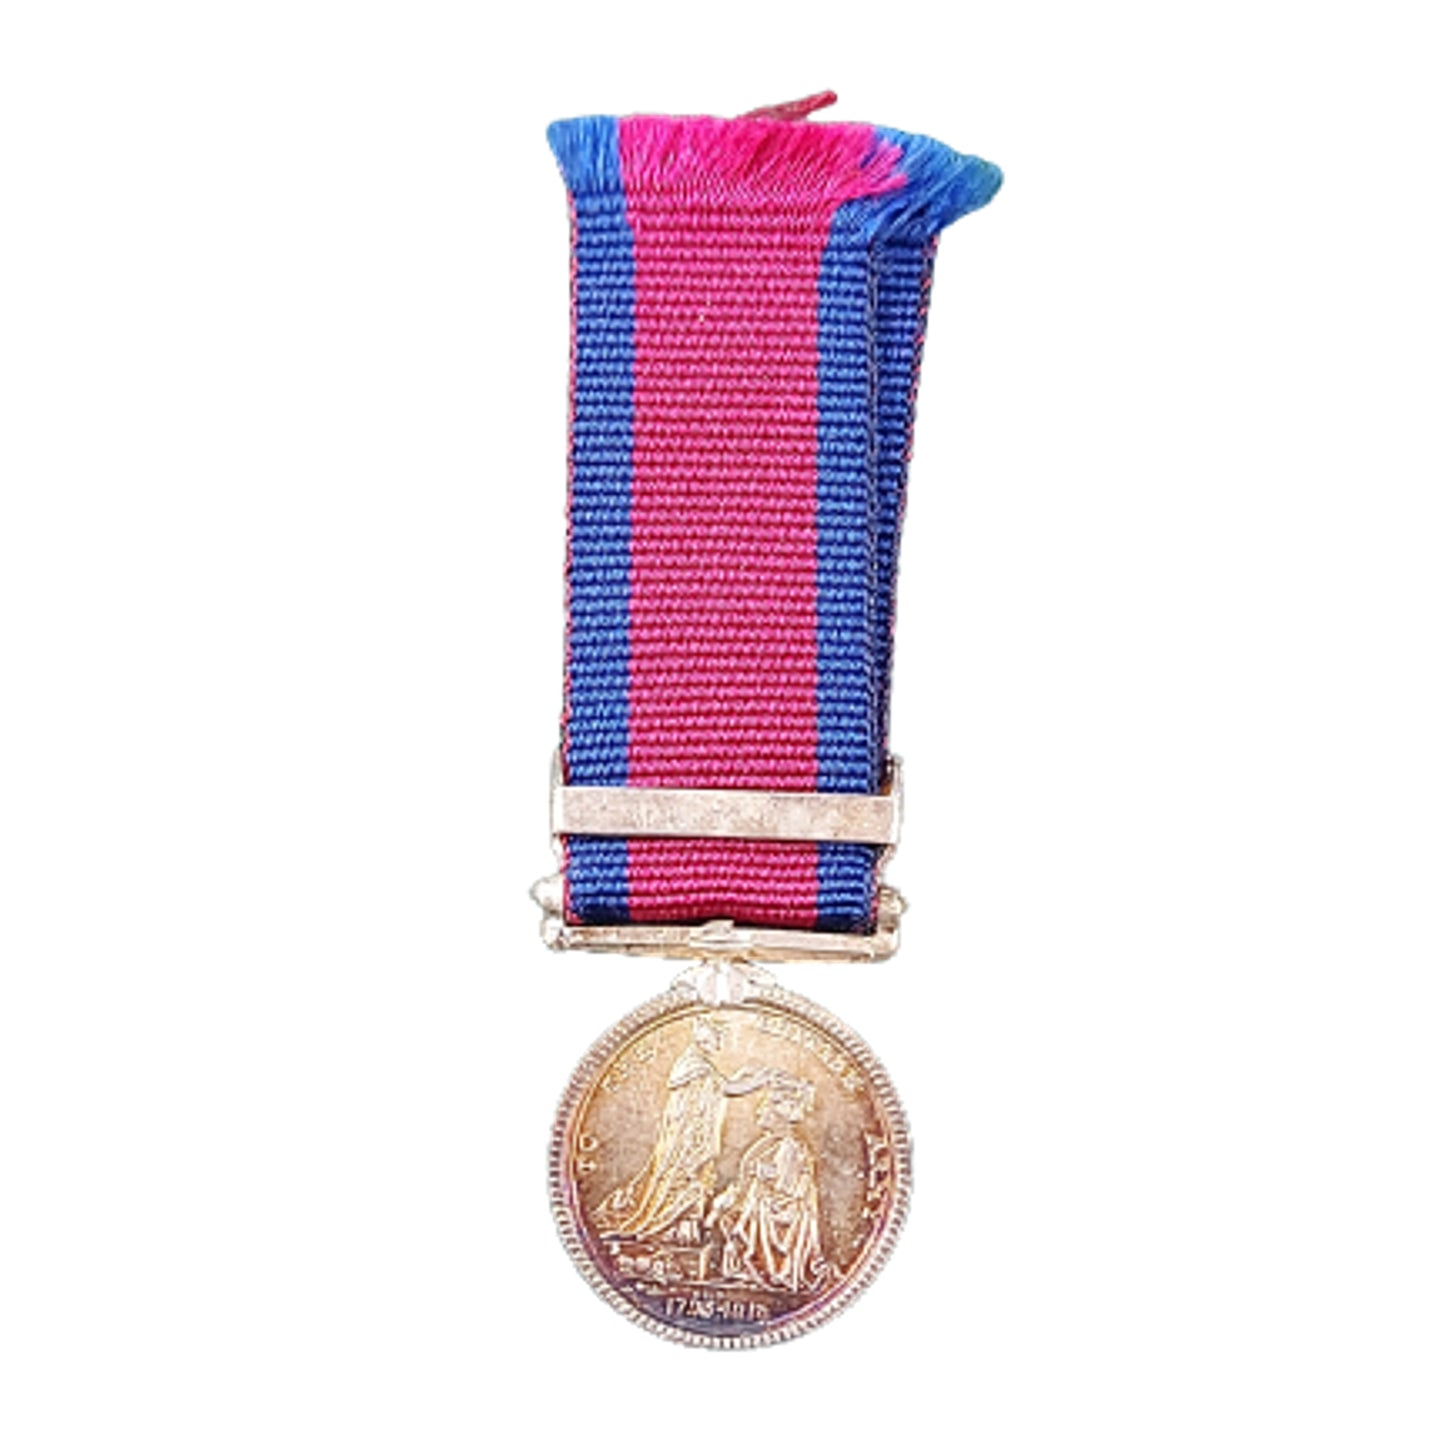 Miniature Military General Service Medal With Chrysler's Farm Bar